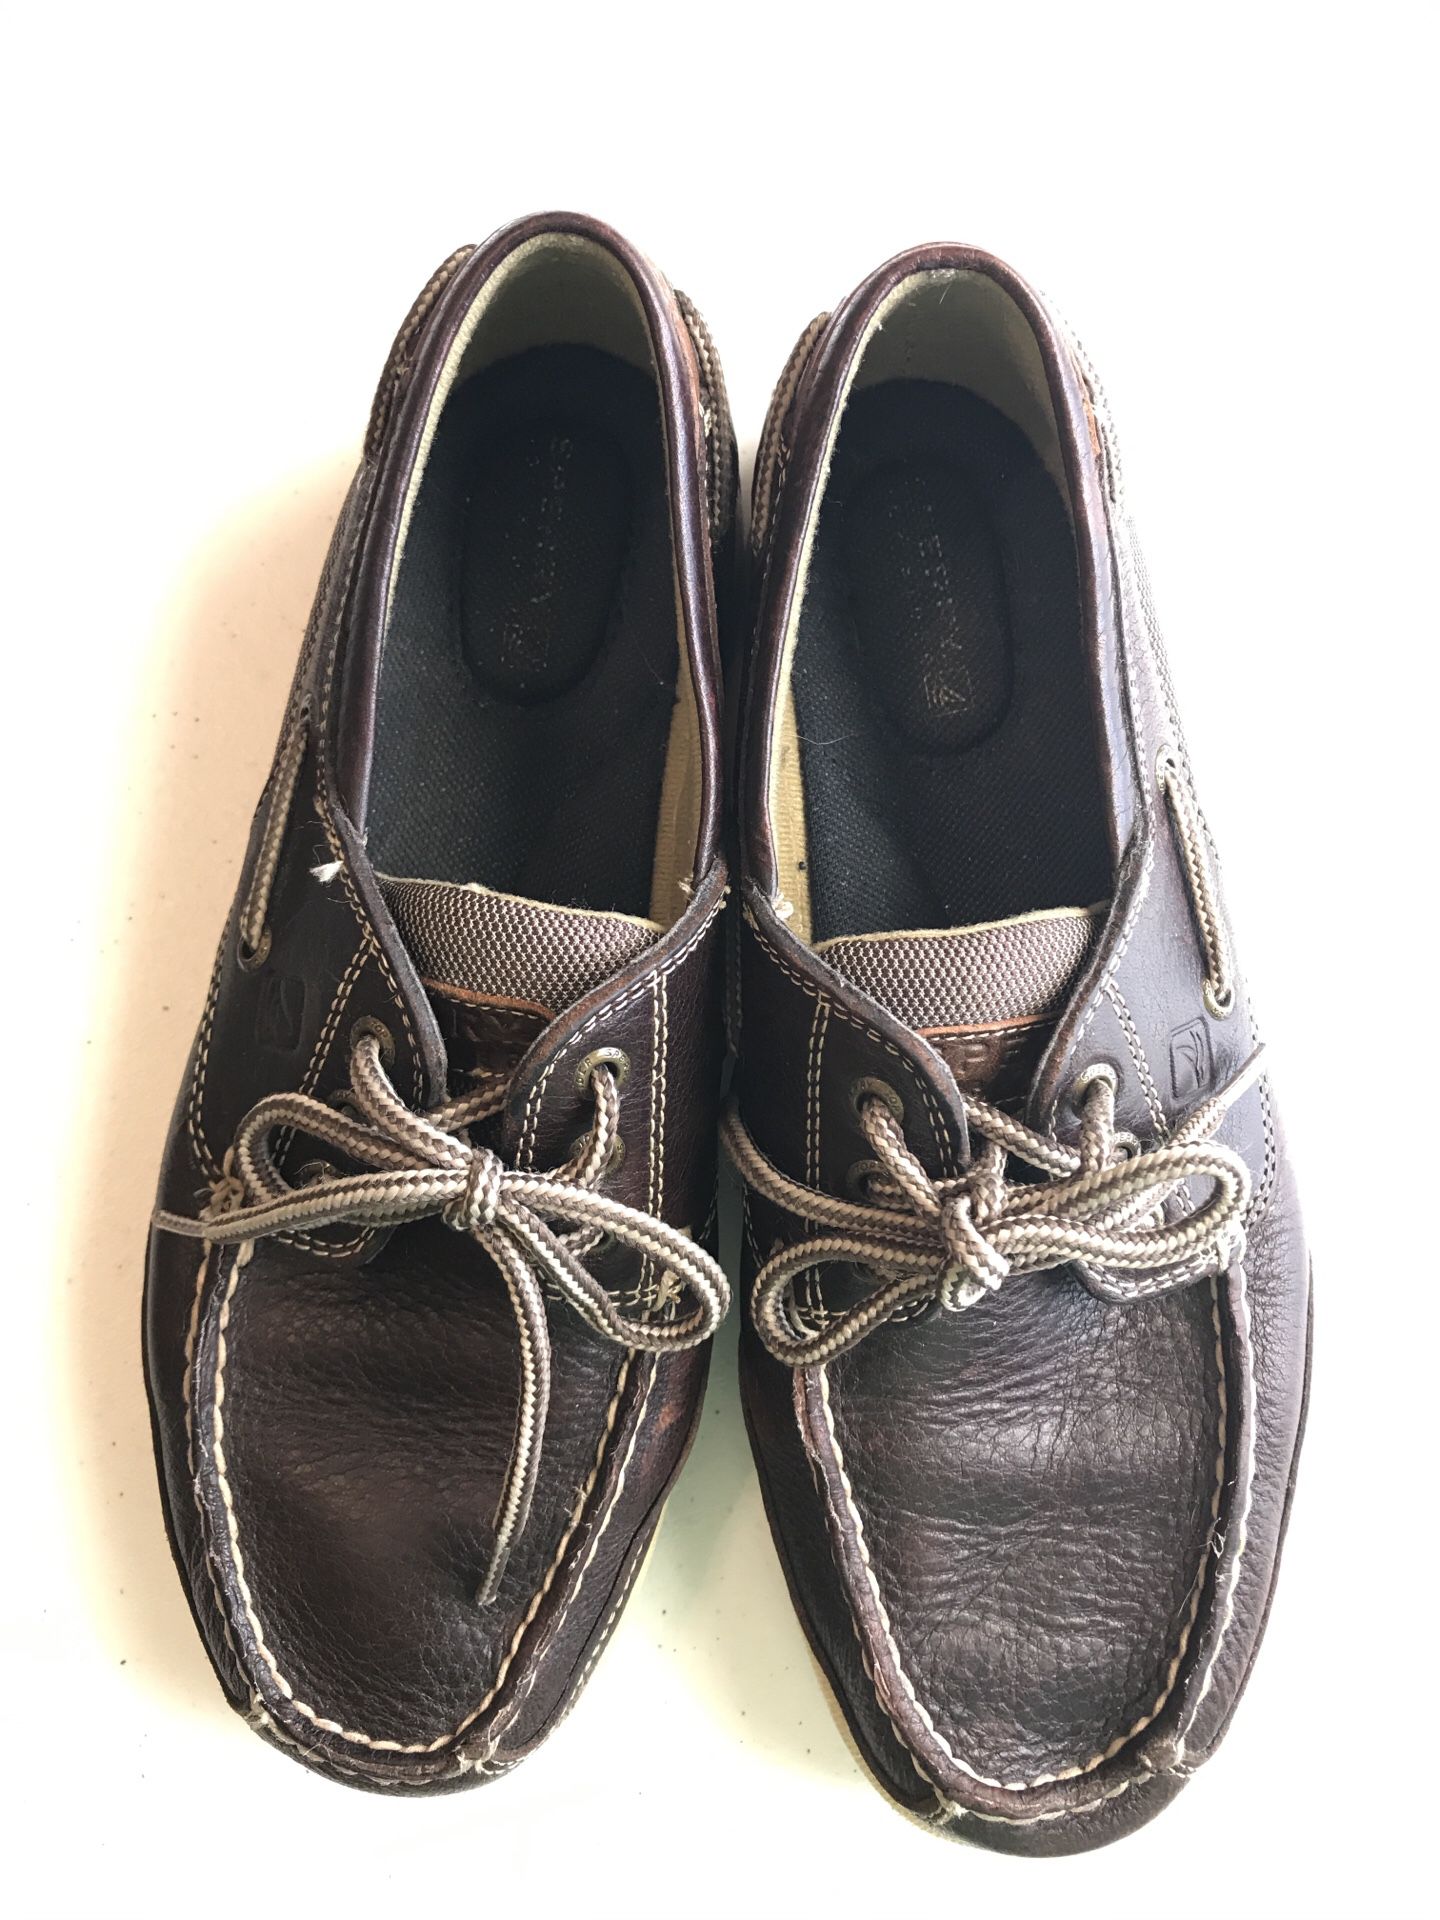 Sperry Brown Boat Shoe size 7.5 M